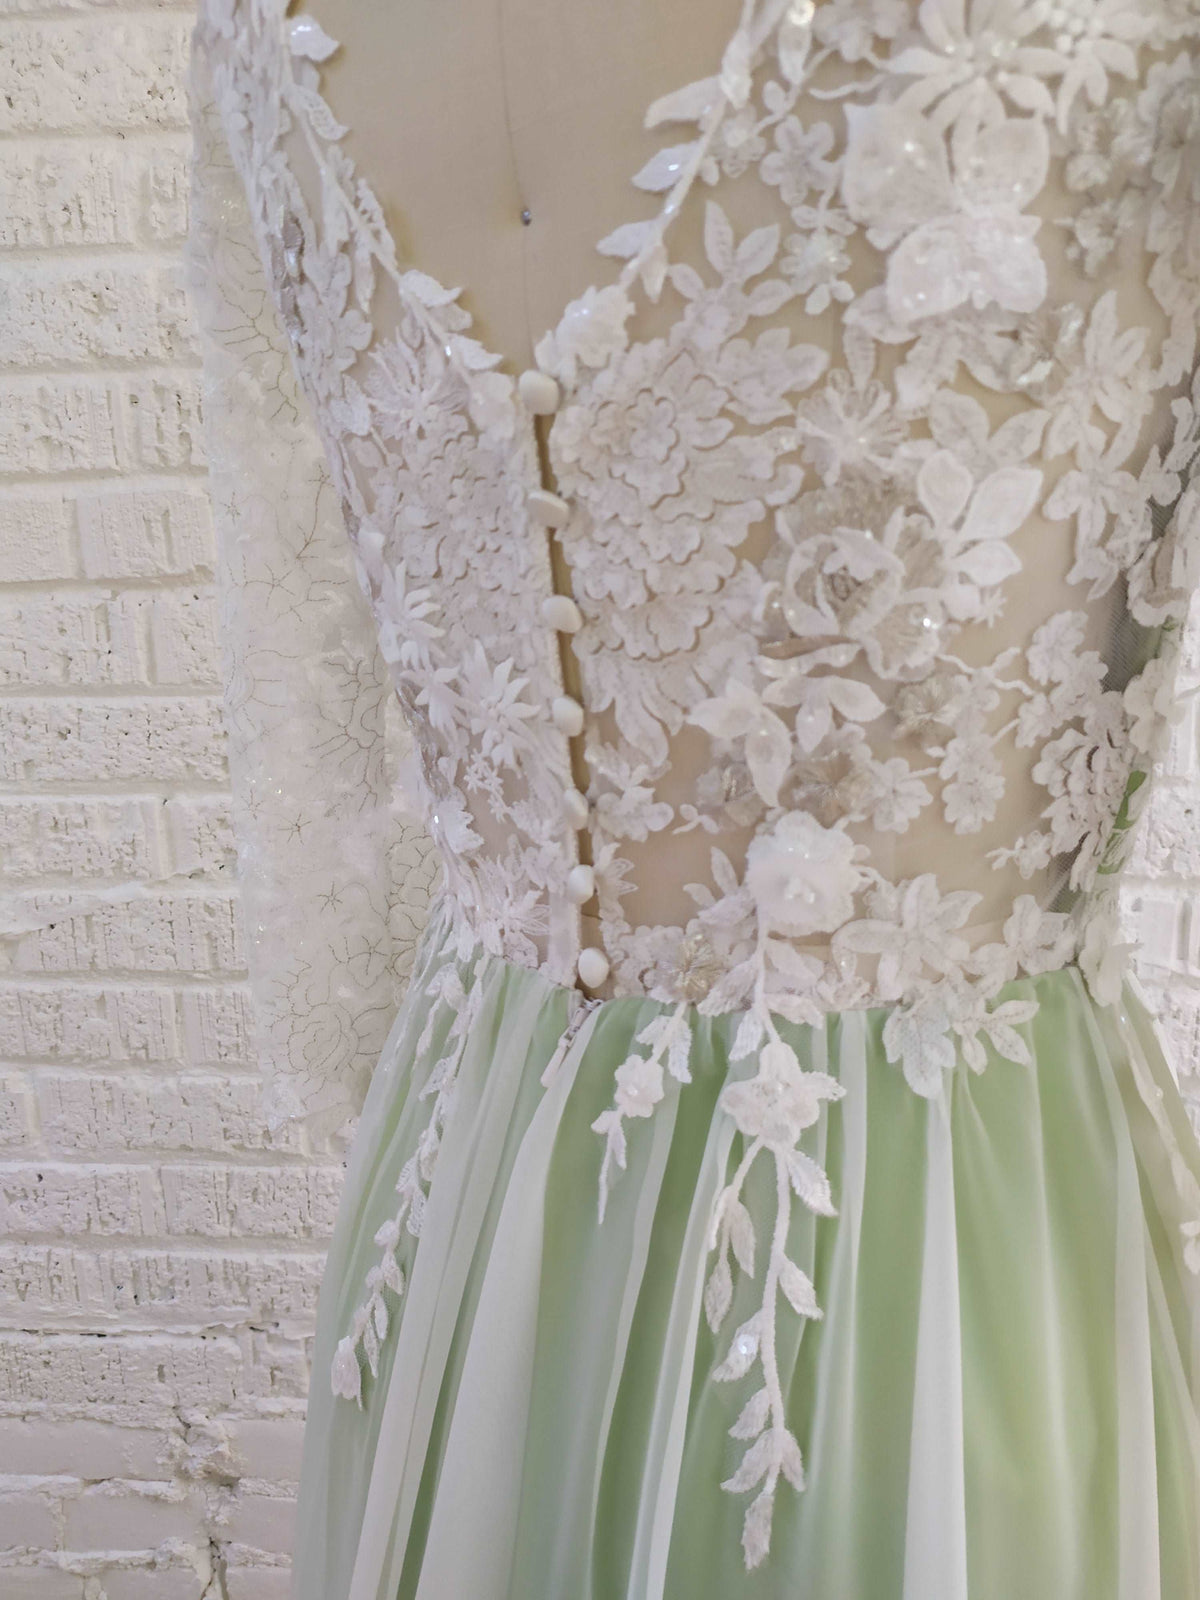 Romantic colorful green silk wedding dress. Ready to ship, size 2 petite. By Catherine Langlois